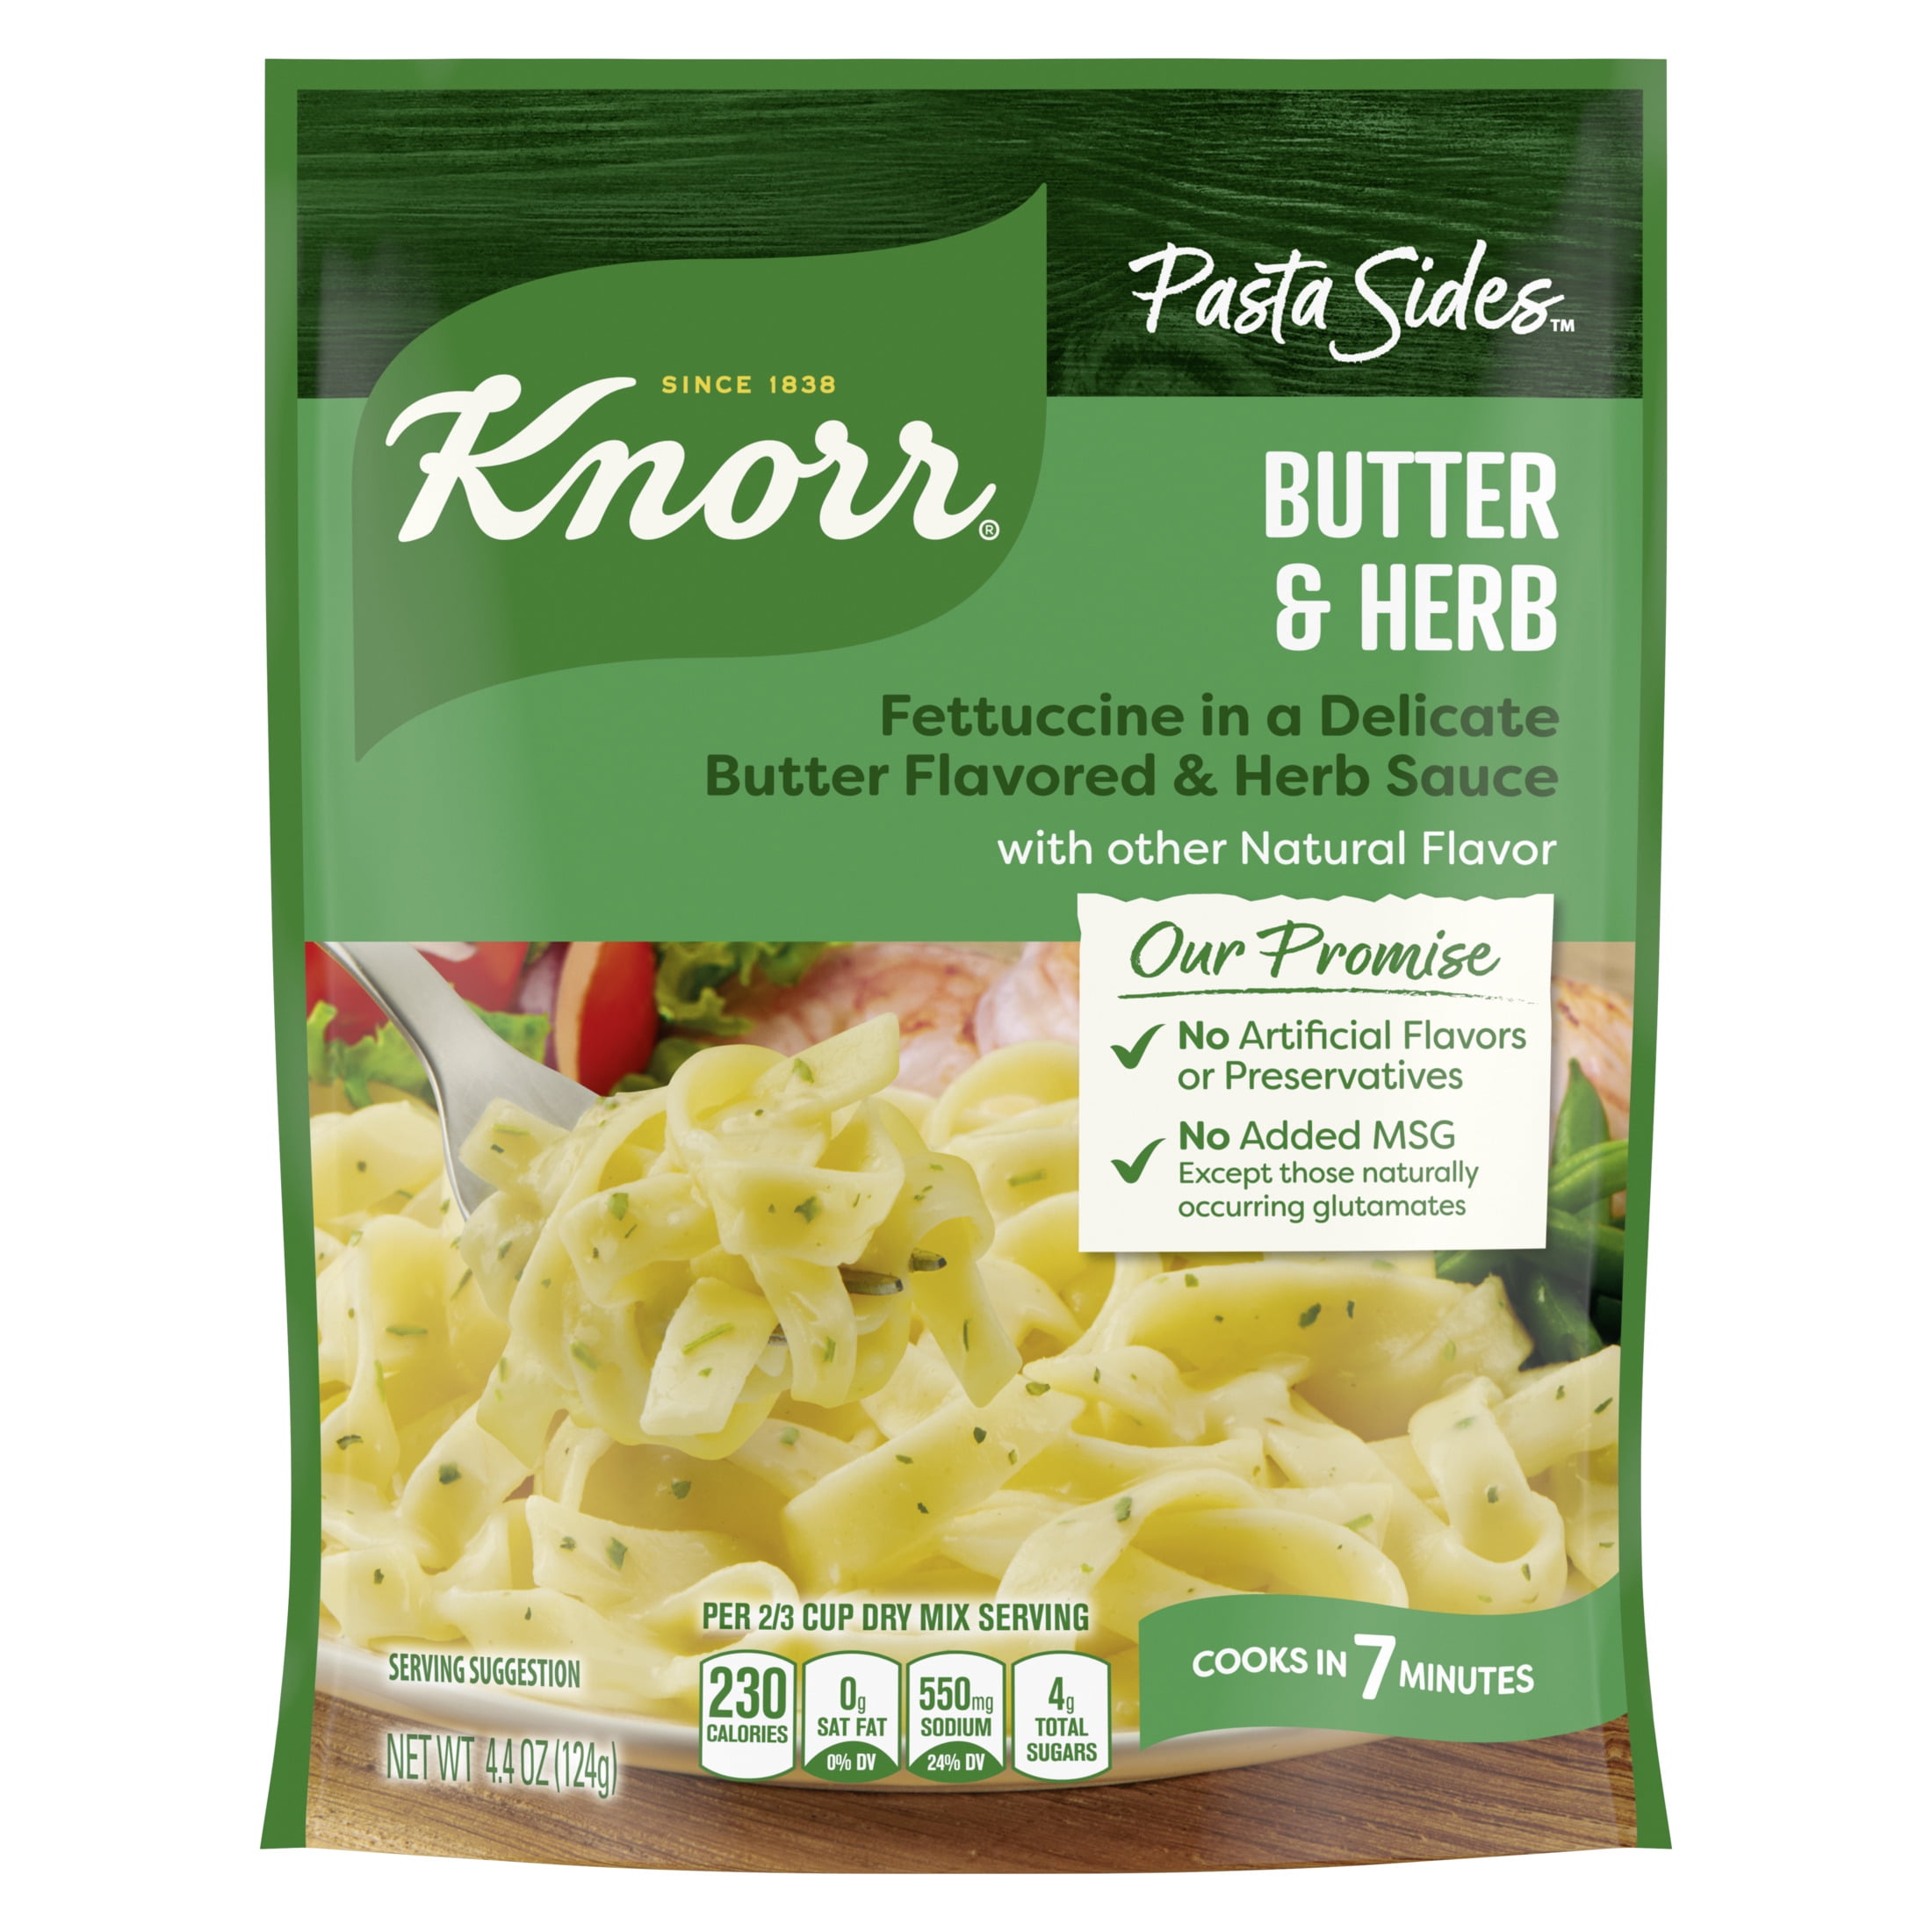 Knorr Pasta Sides Butter & Herb, Cooks in 7 Minutes, No Artificial Flavors, No Preservatives, No Added MSG 4.4 oz